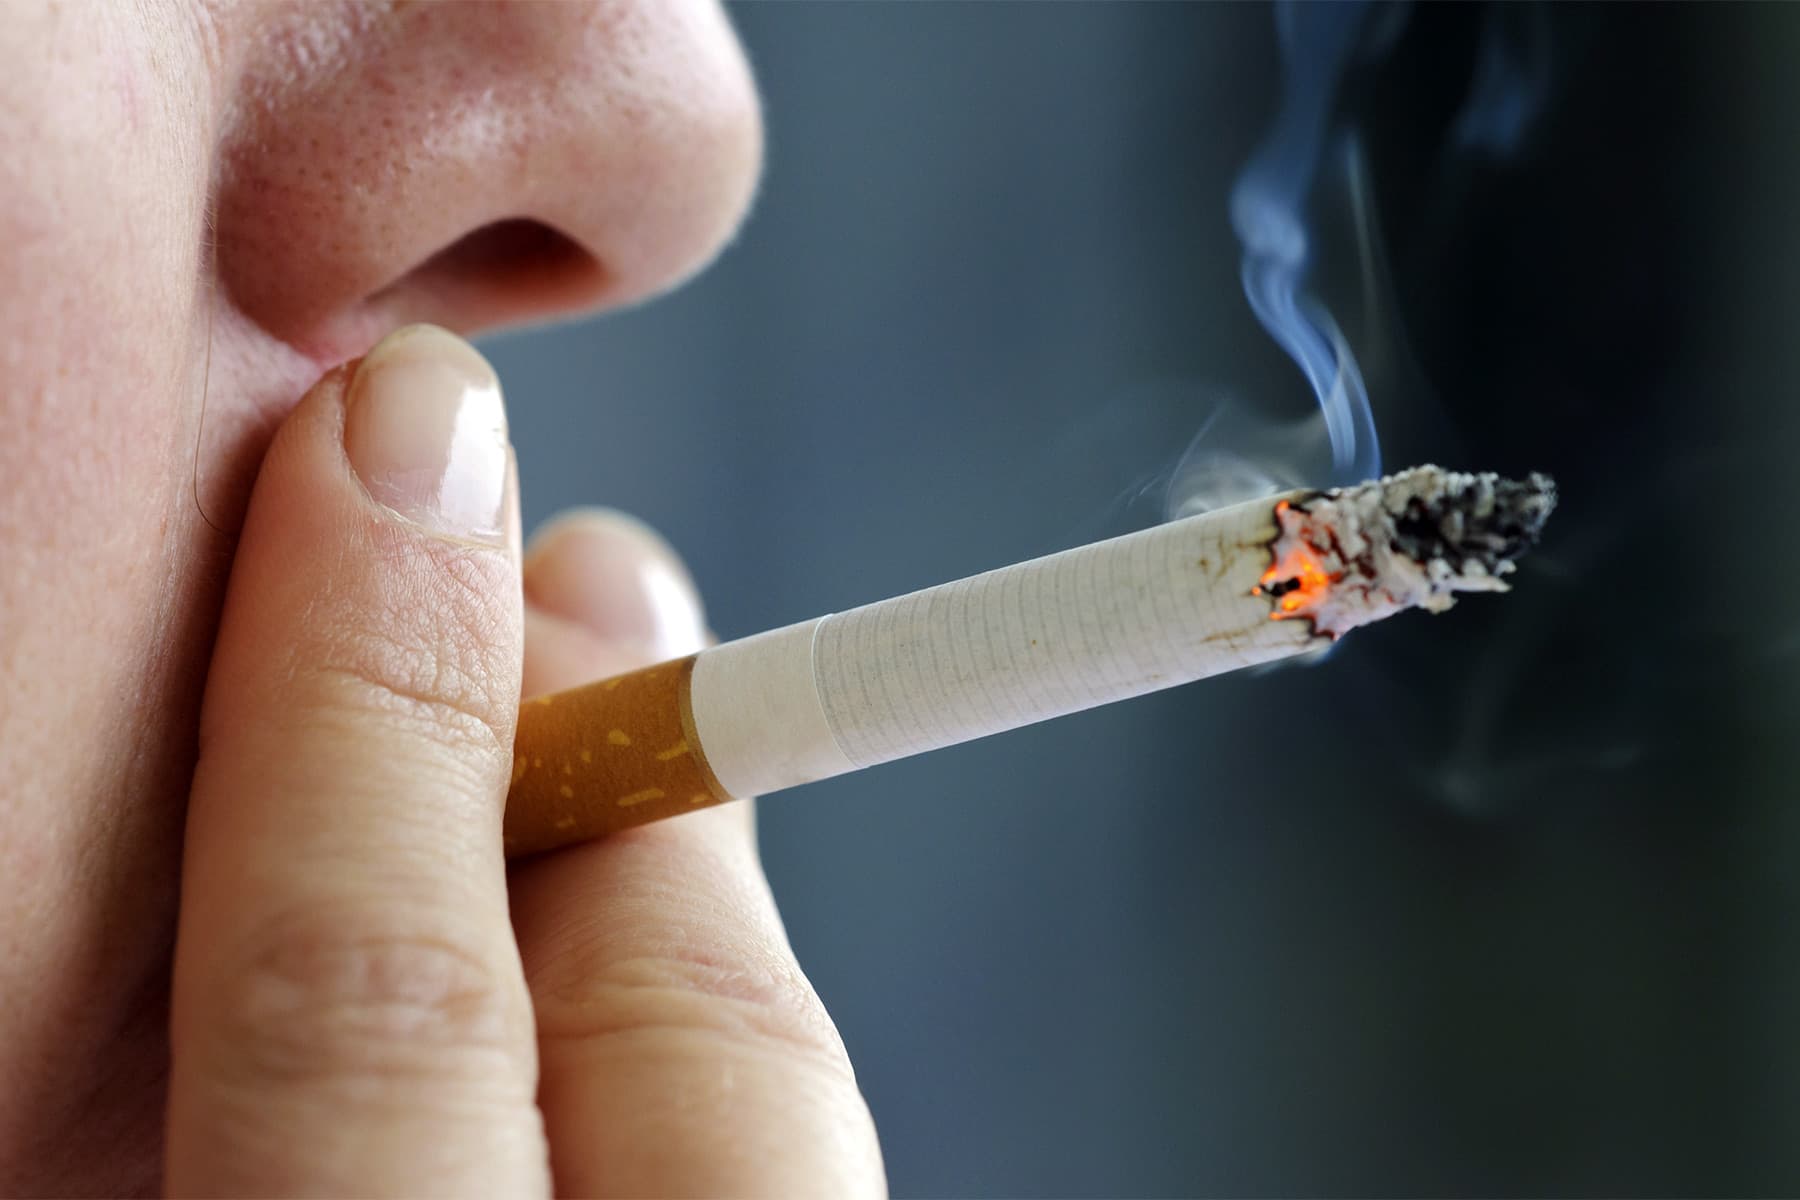 Nearly 30% of U.S. Cancer Deaths Linked to Smoking